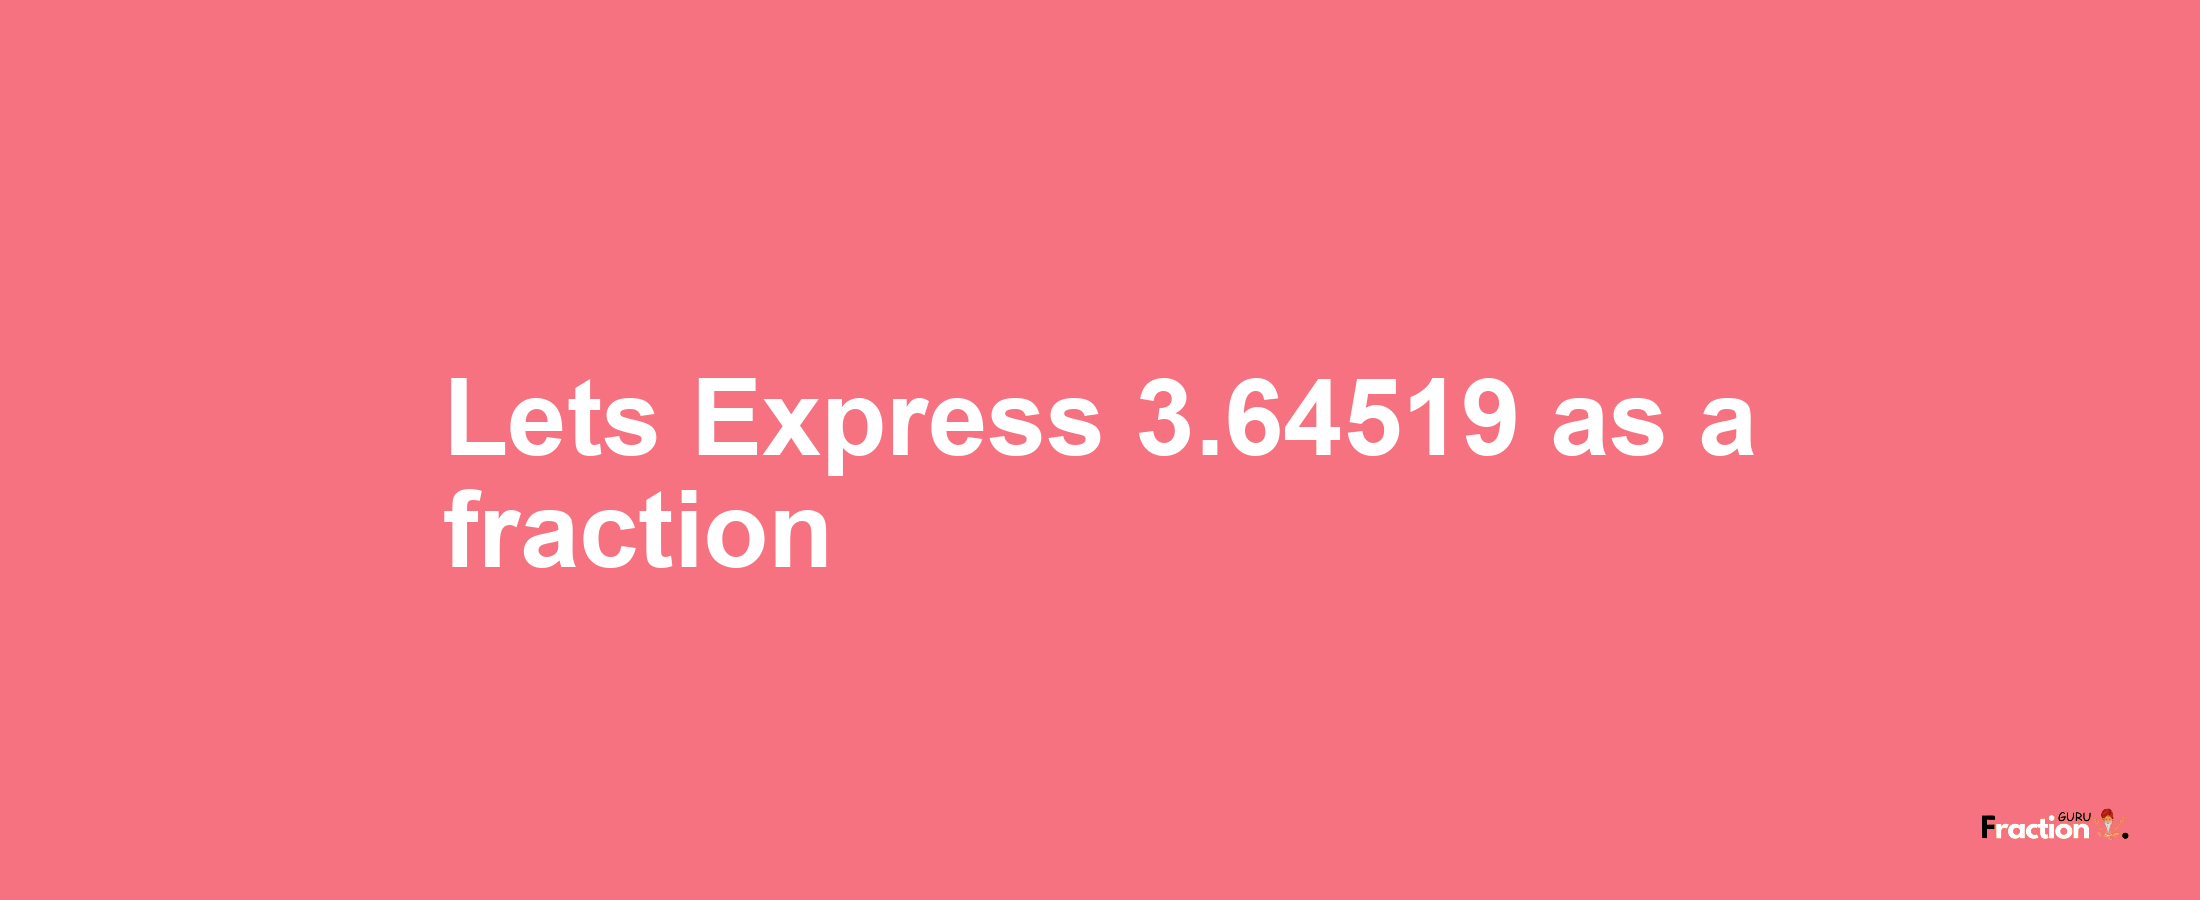 Lets Express 3.64519 as afraction